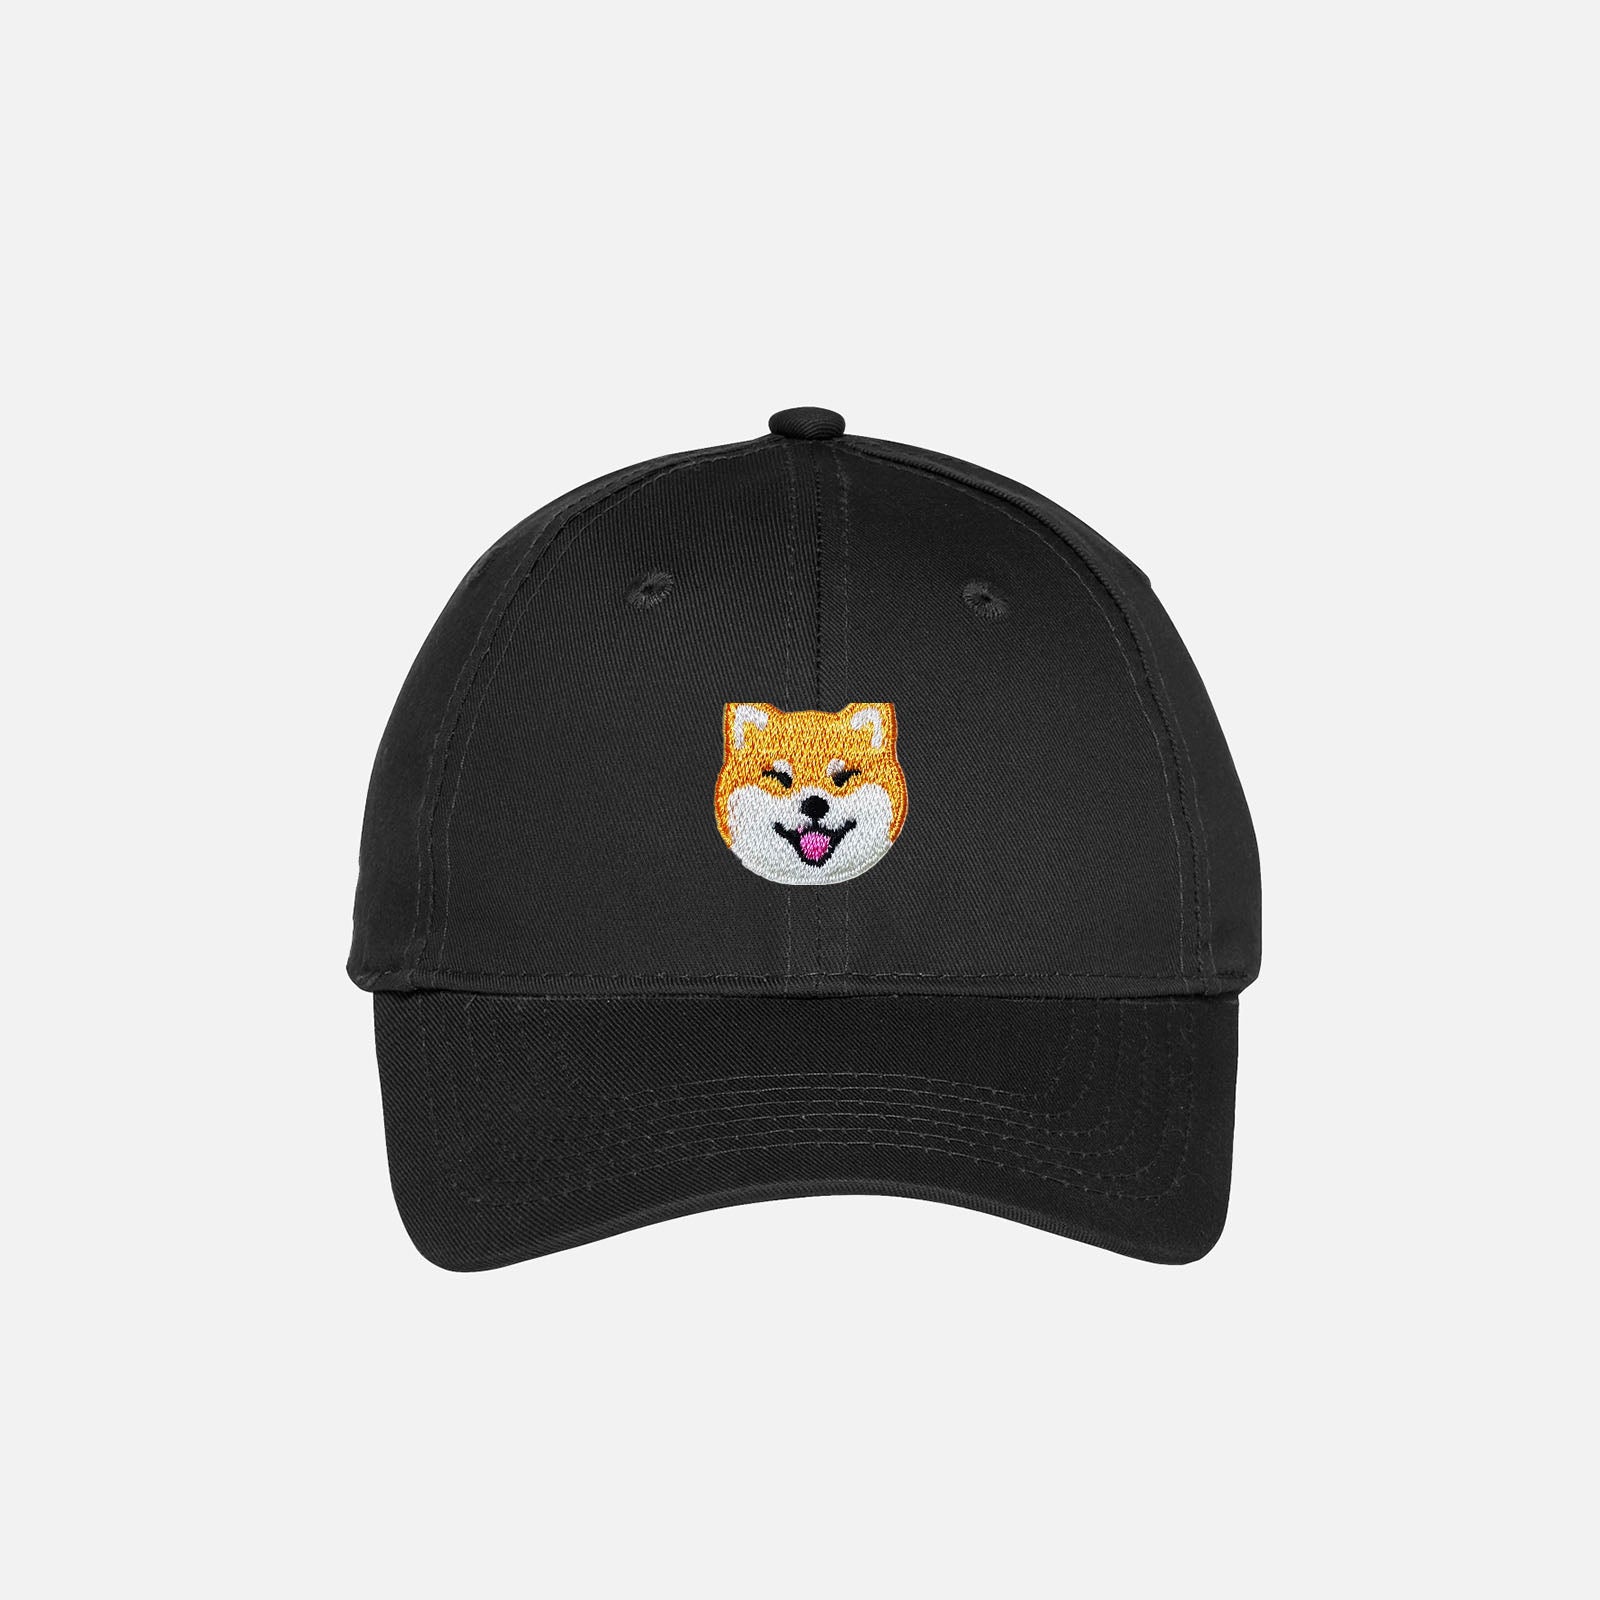 Black Custom Dog Kids Hat personalized and embroidered on the front.